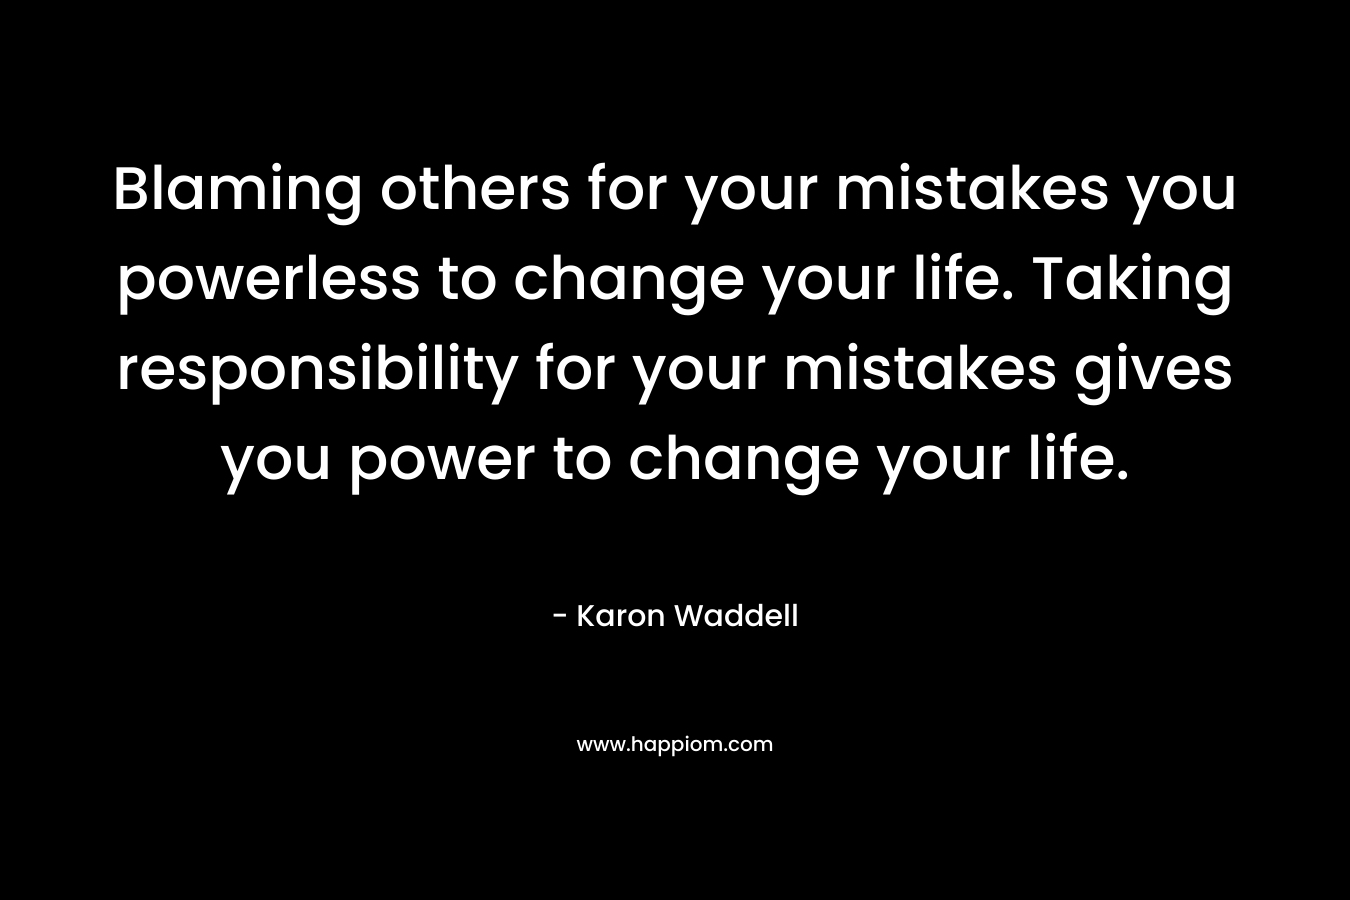 Blaming others for your mistakes you powerless to change your life. Taking responsibility for your mistakes gives you power to change your life.